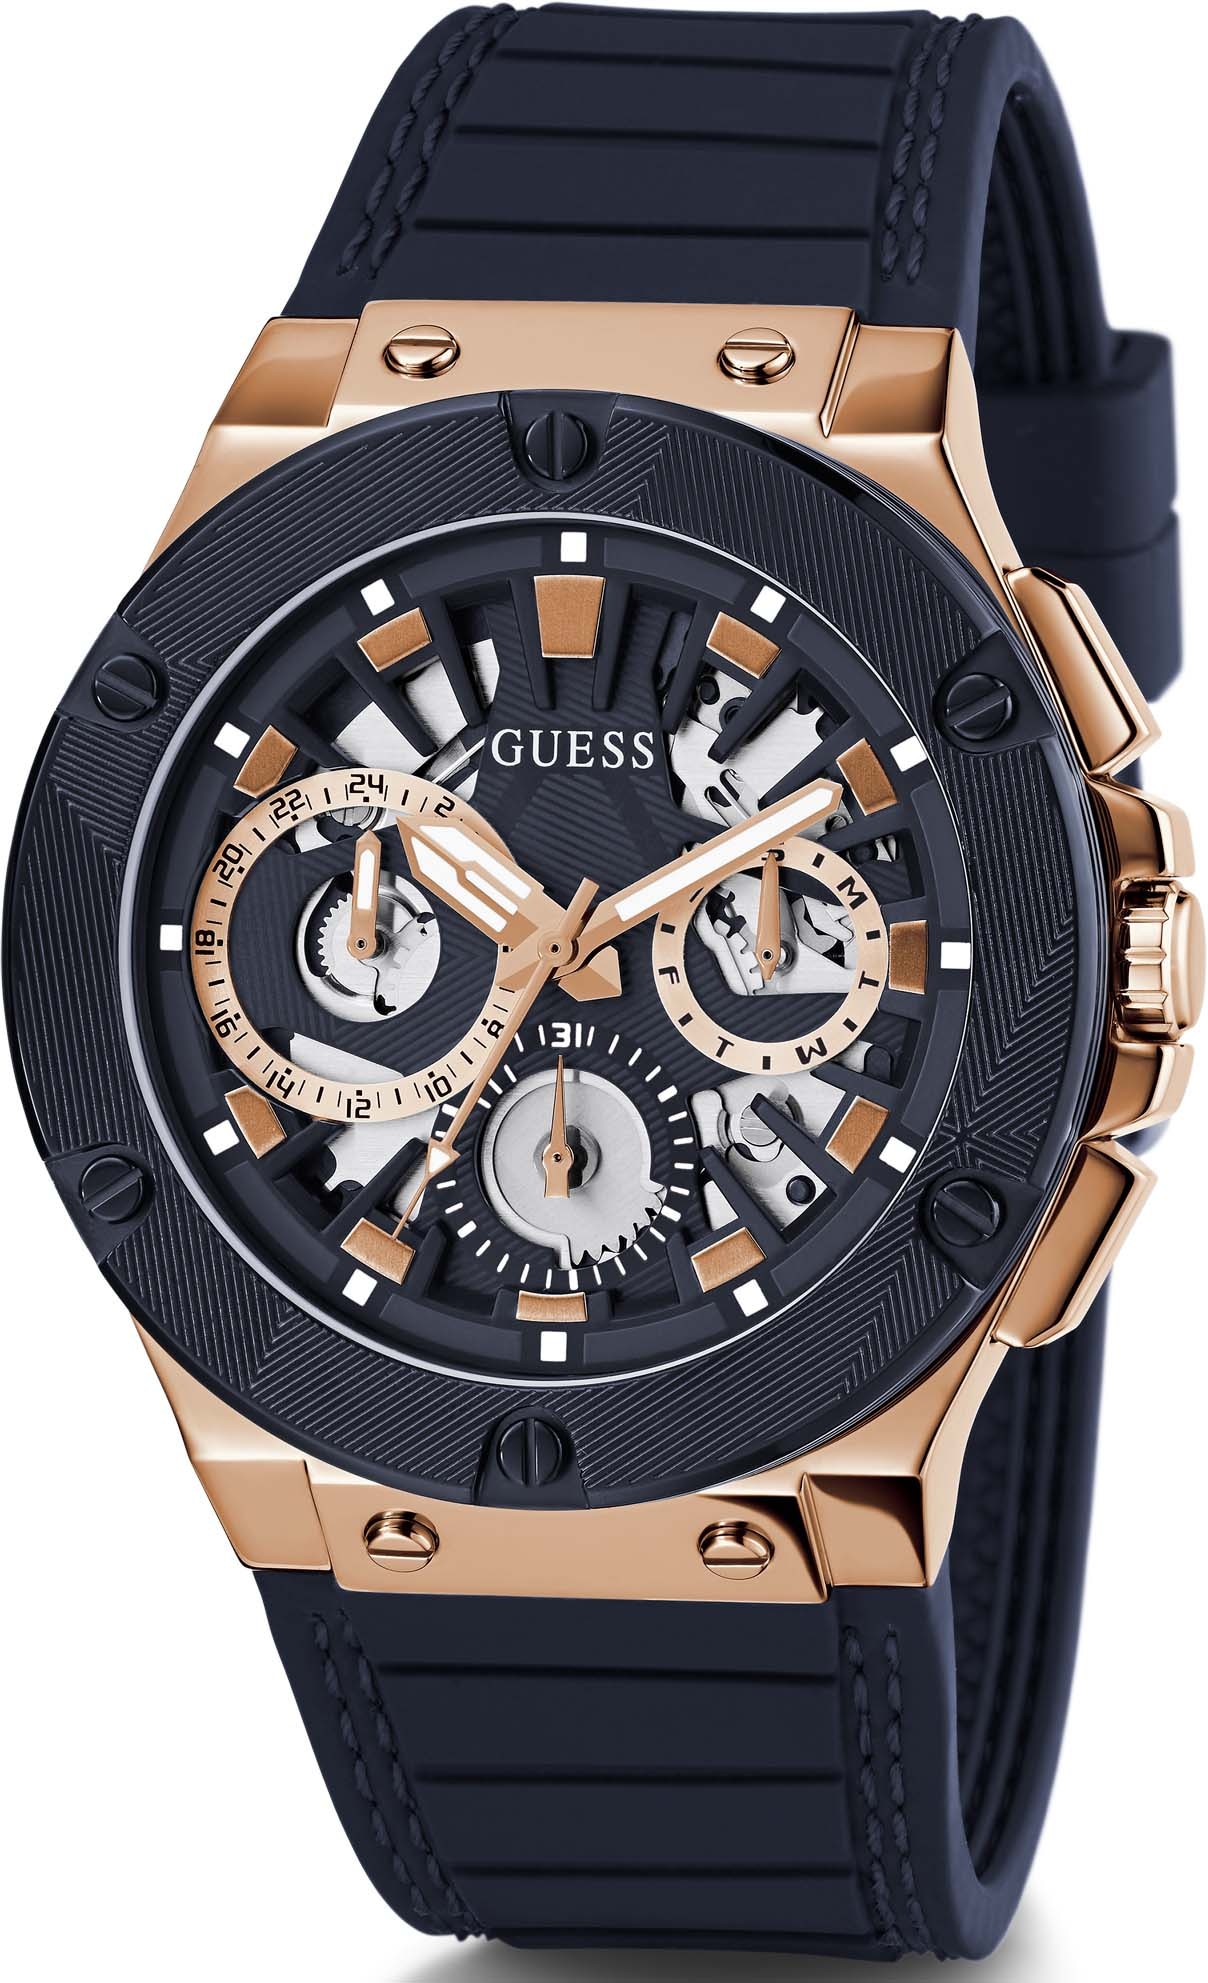 Guess Multifunktionsuhr »GW0487G4«